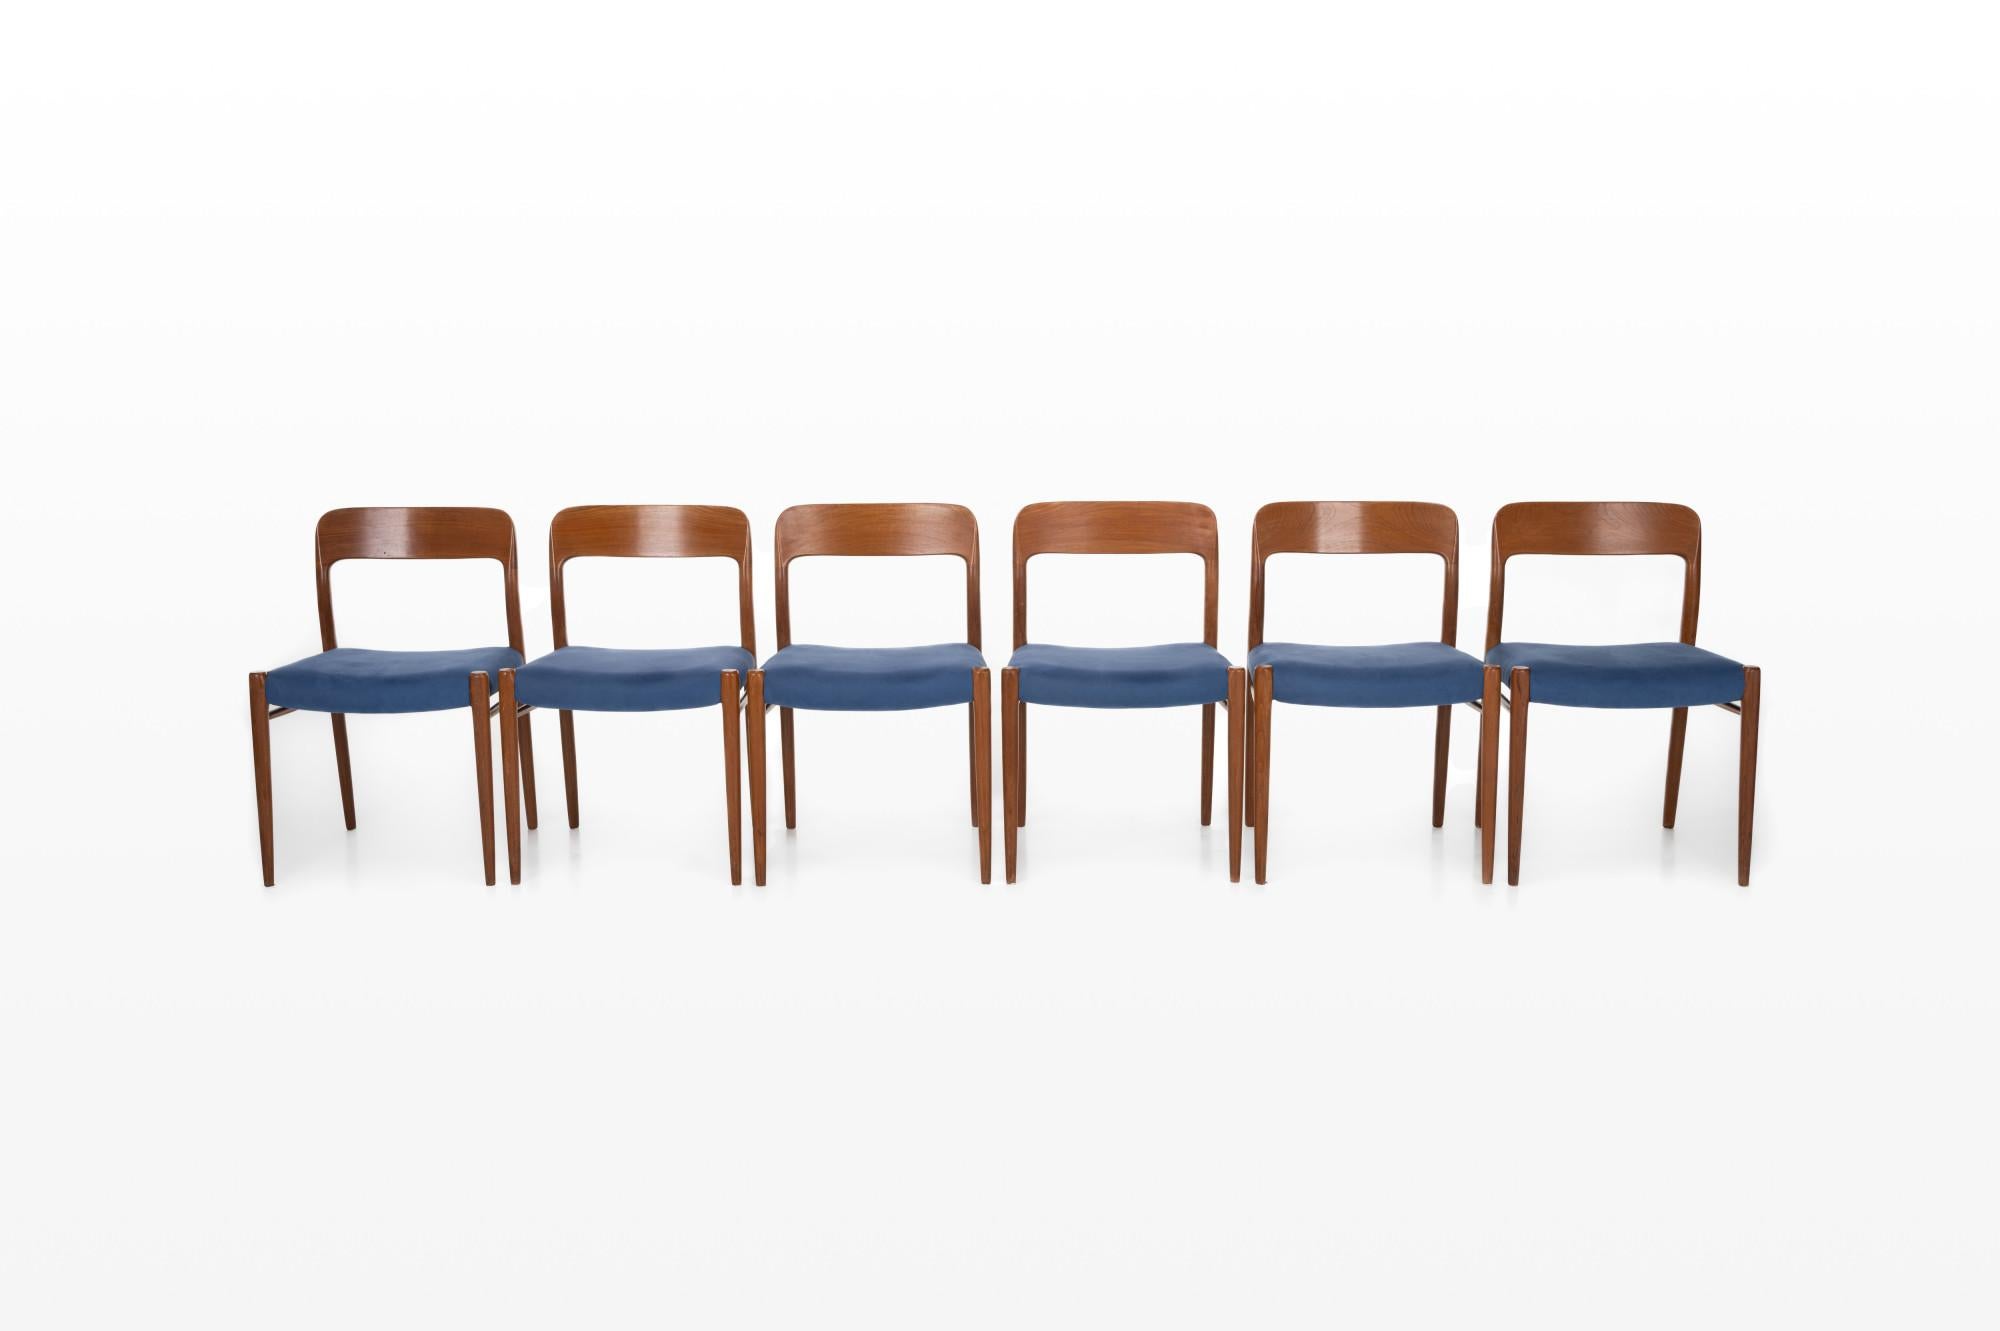 Model 75 dining chairs by Niels Otto Møller for J.L. Møllers Furniture Factory, Denmark, 1960s, set of 6.